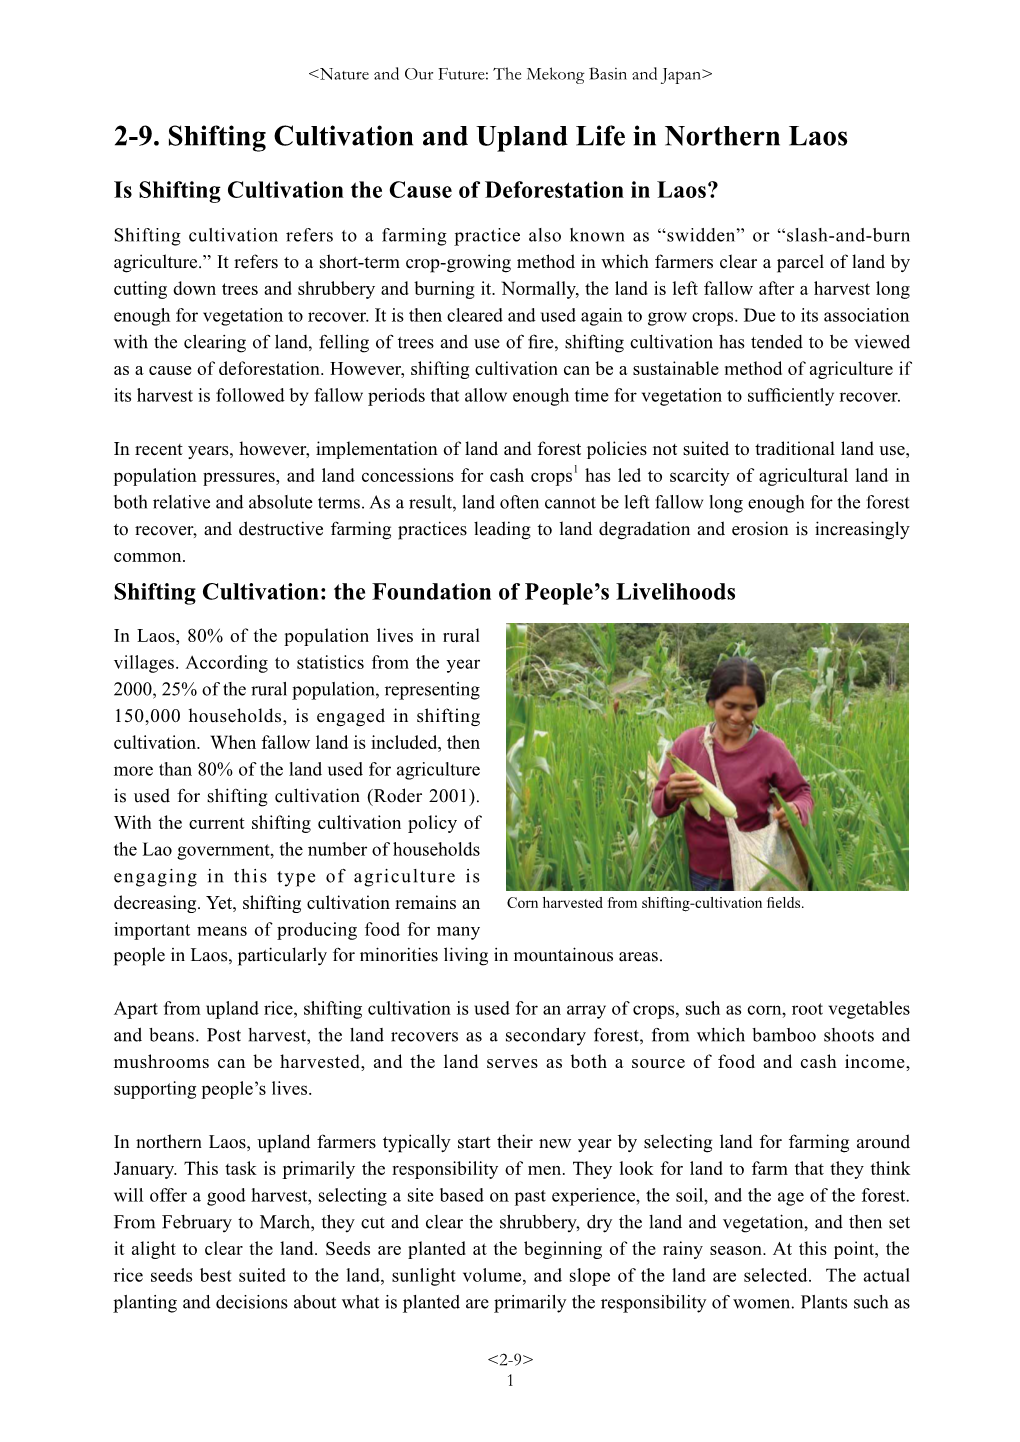 2-9. Shifting Cultivation and Upland Life in Northern Laos